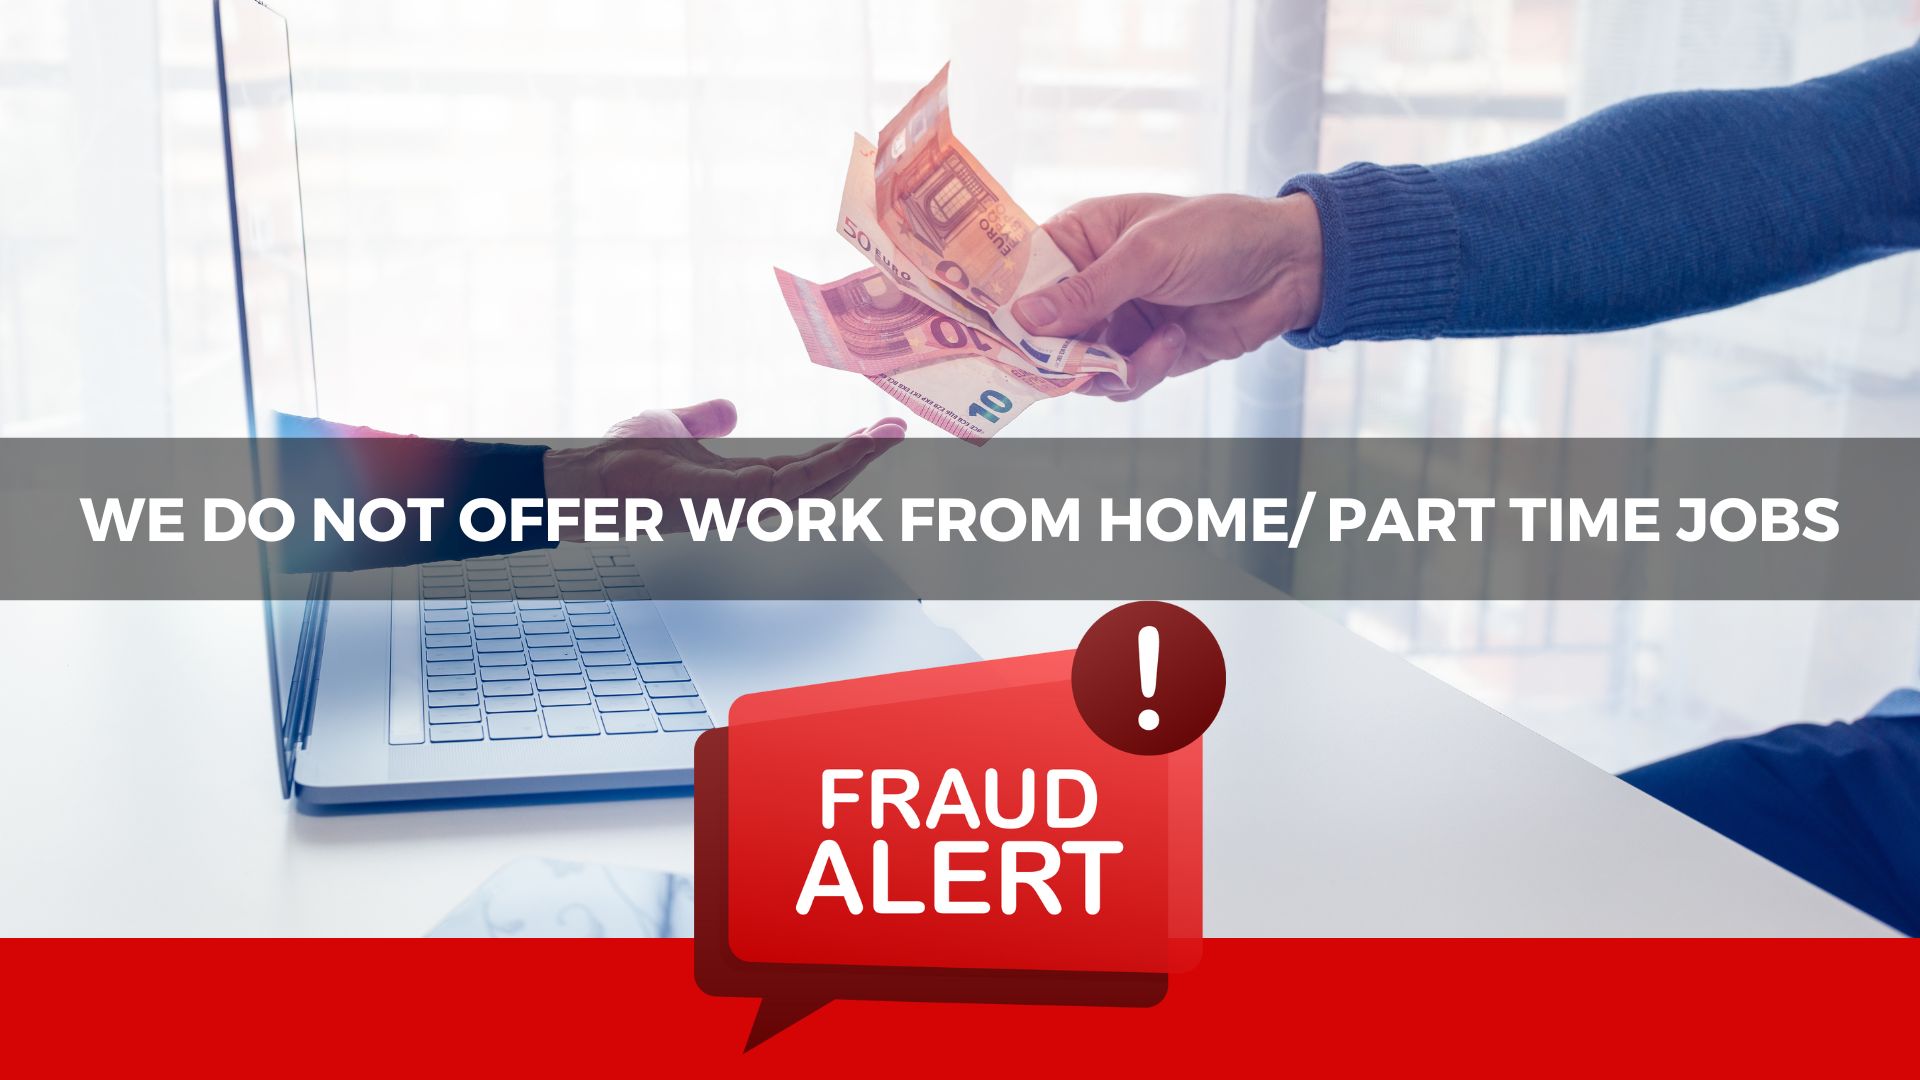 Stay Away from Fake Job Offers, We Recruit Eligible Candidates Based on Their Talent Only